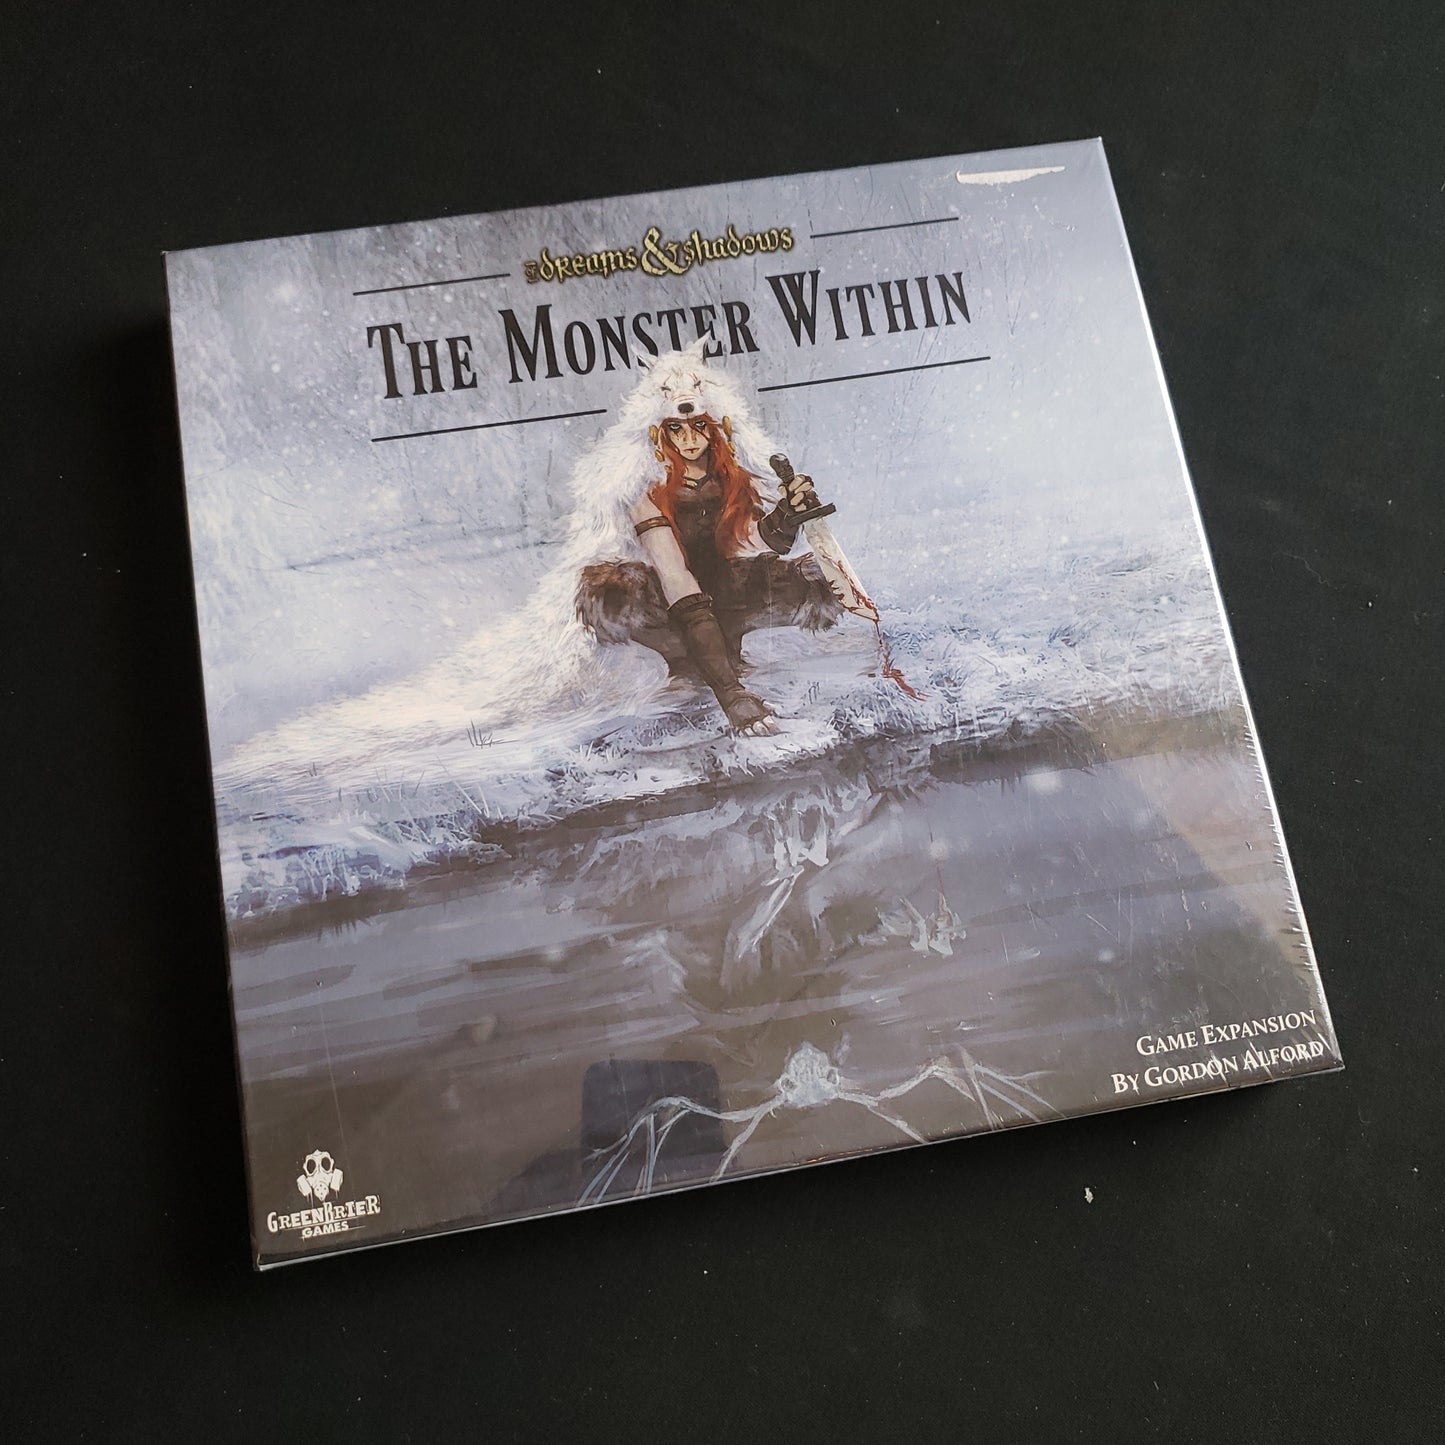 Image shows the front cover of the box of the Monster Within expansion for the board game Of Dreams & Shadows